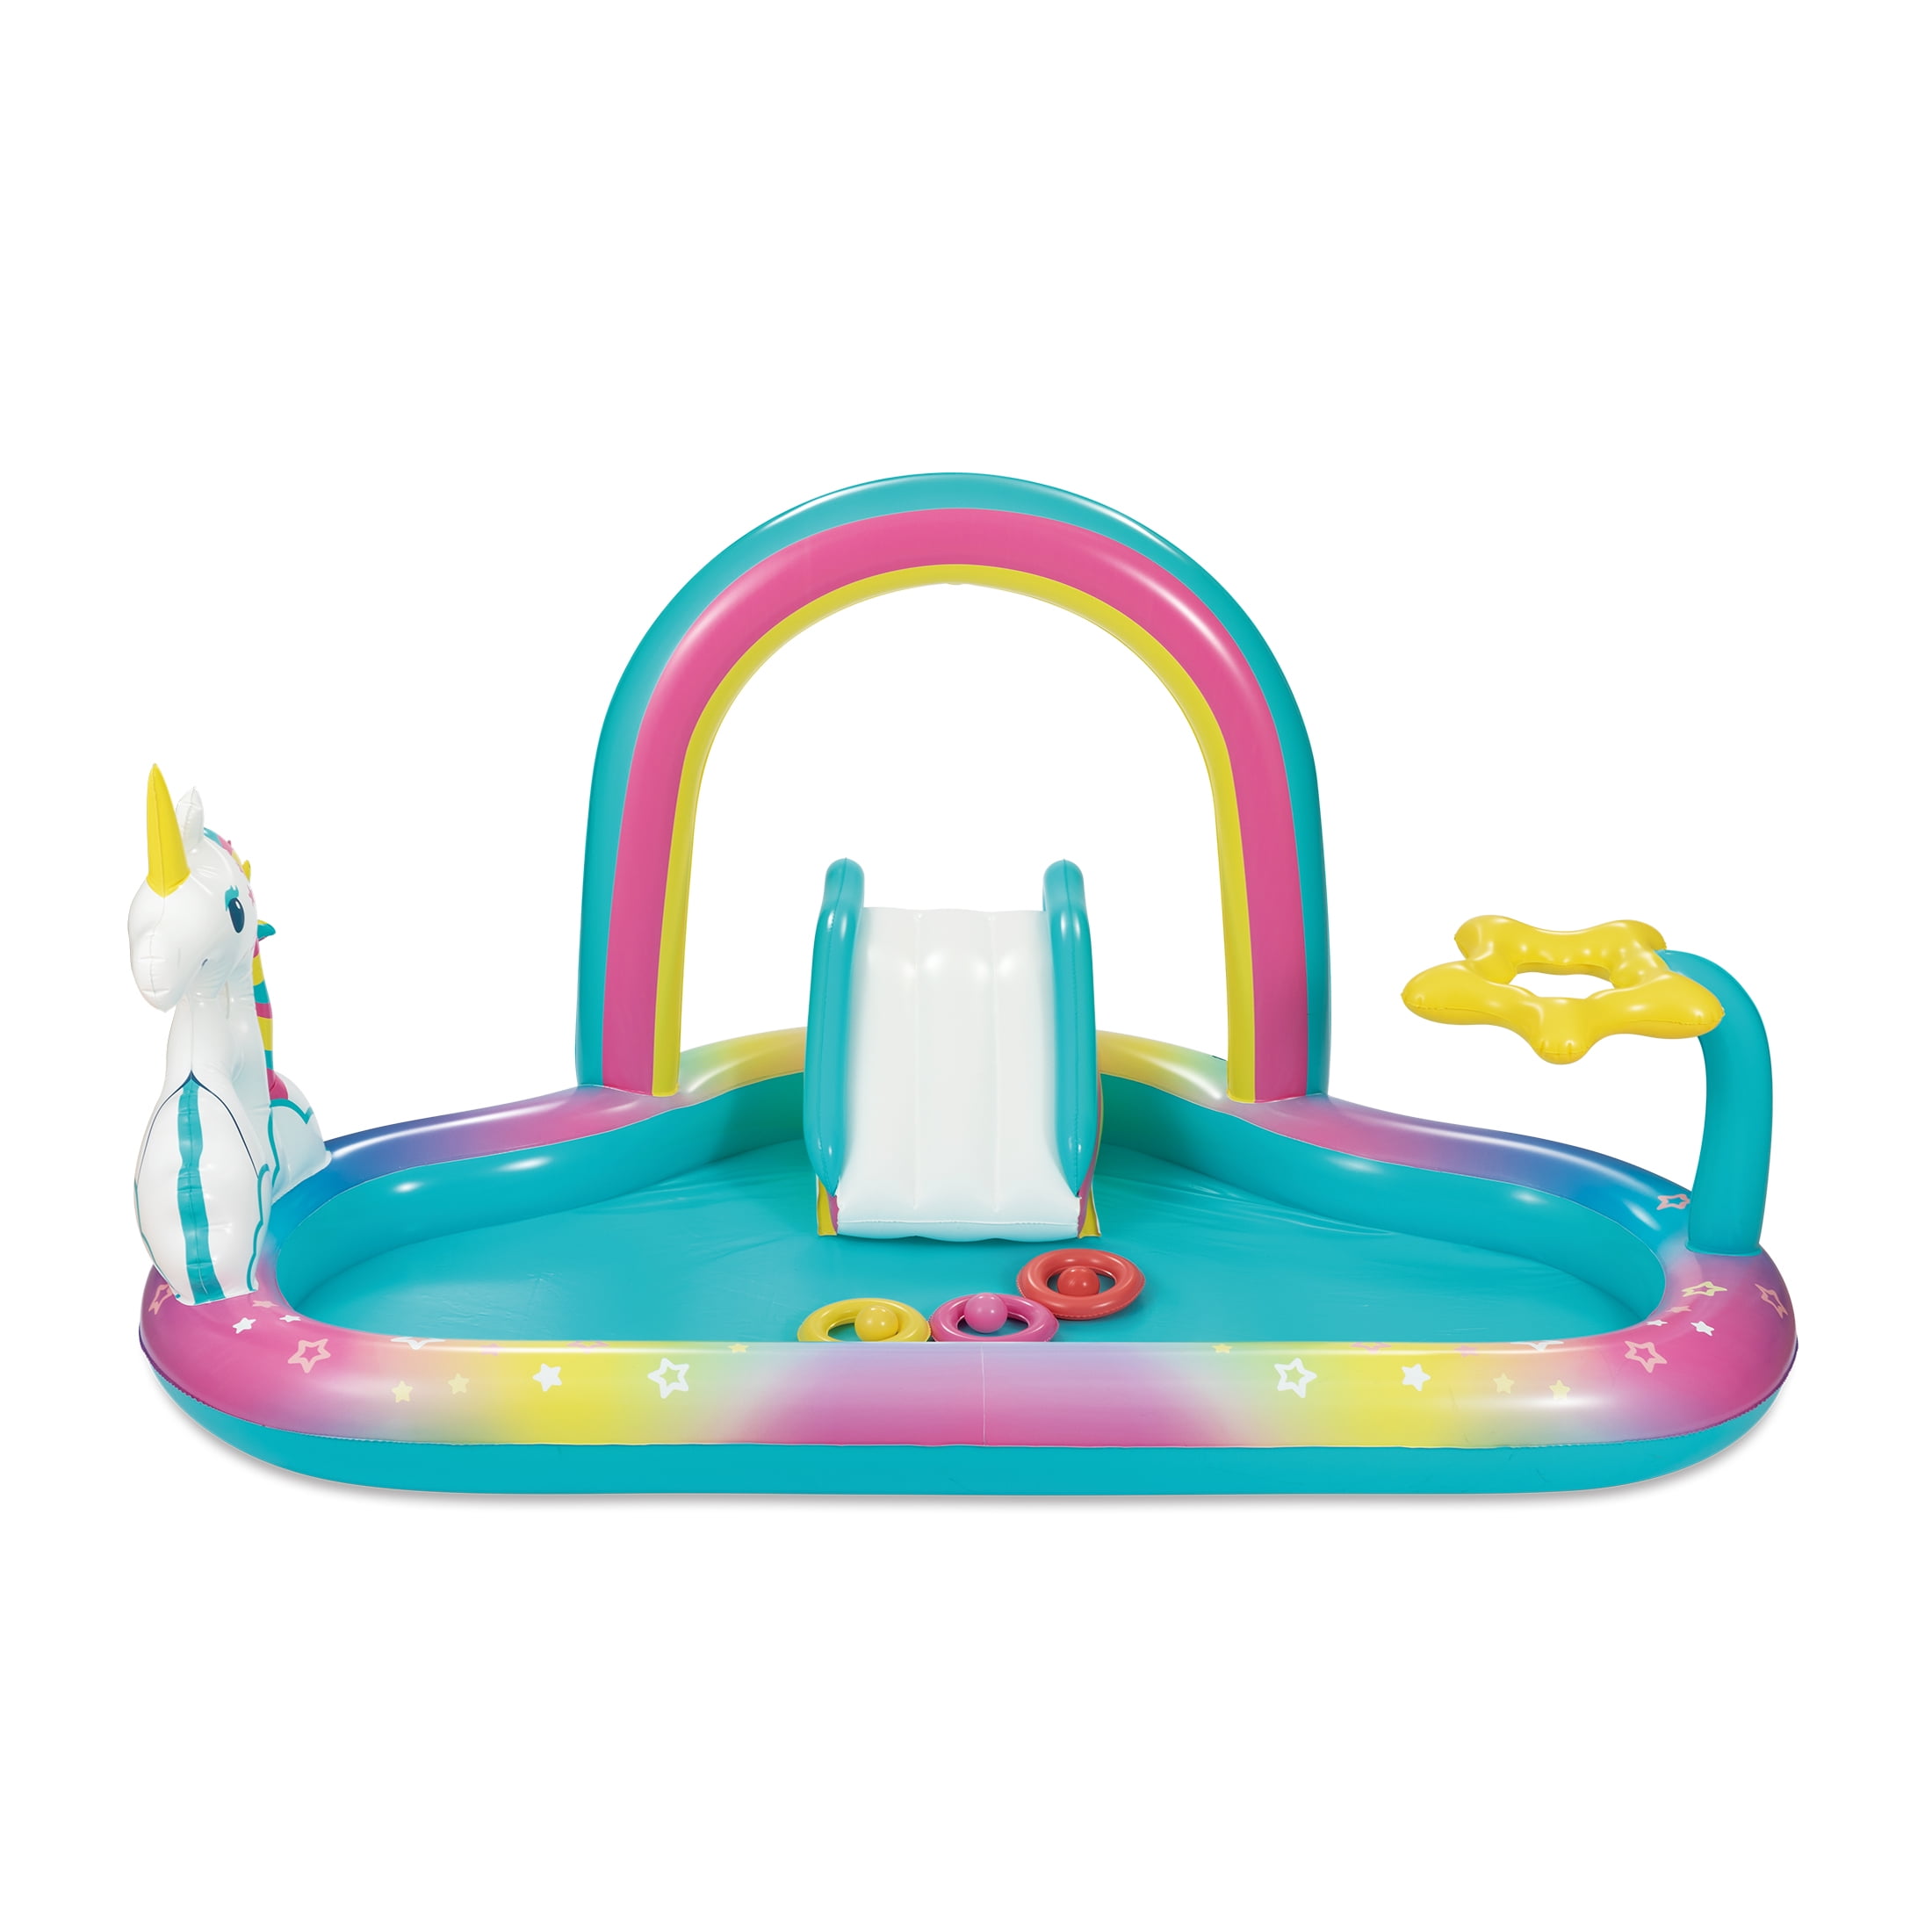 Play Day Inflatable Rainbow Pool & Play Center (95" x 69" x 47") $19.98 + Free Shipping w/ Walmart+ or on $35+